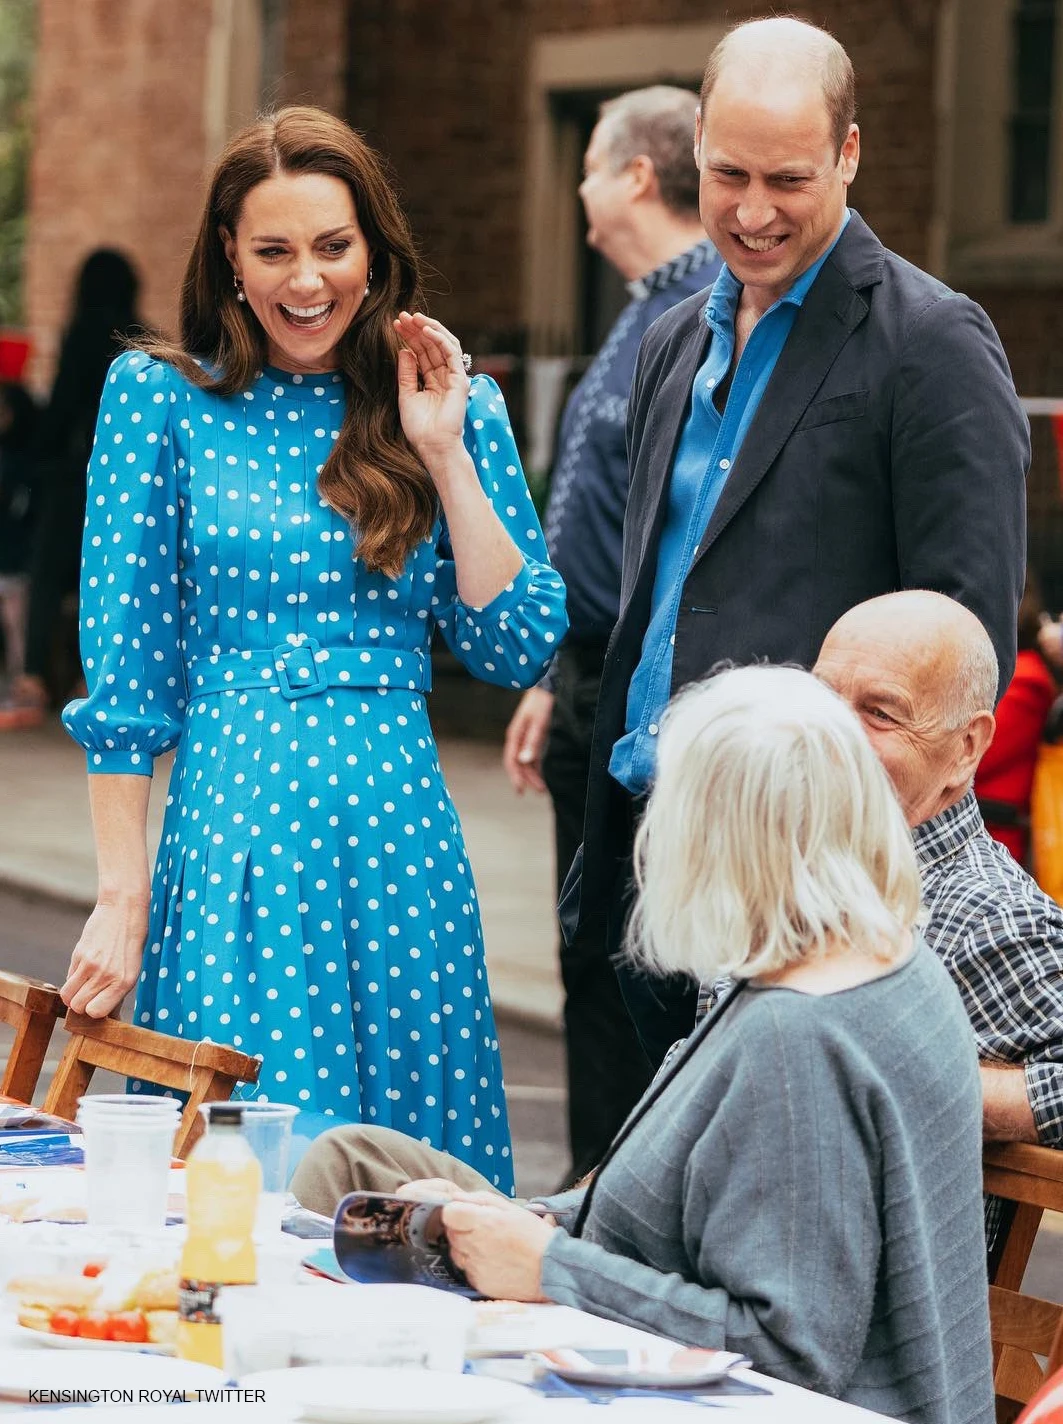 Kate Middleton's Go-To Style Is Polka Dots, Here's How to Copy Her